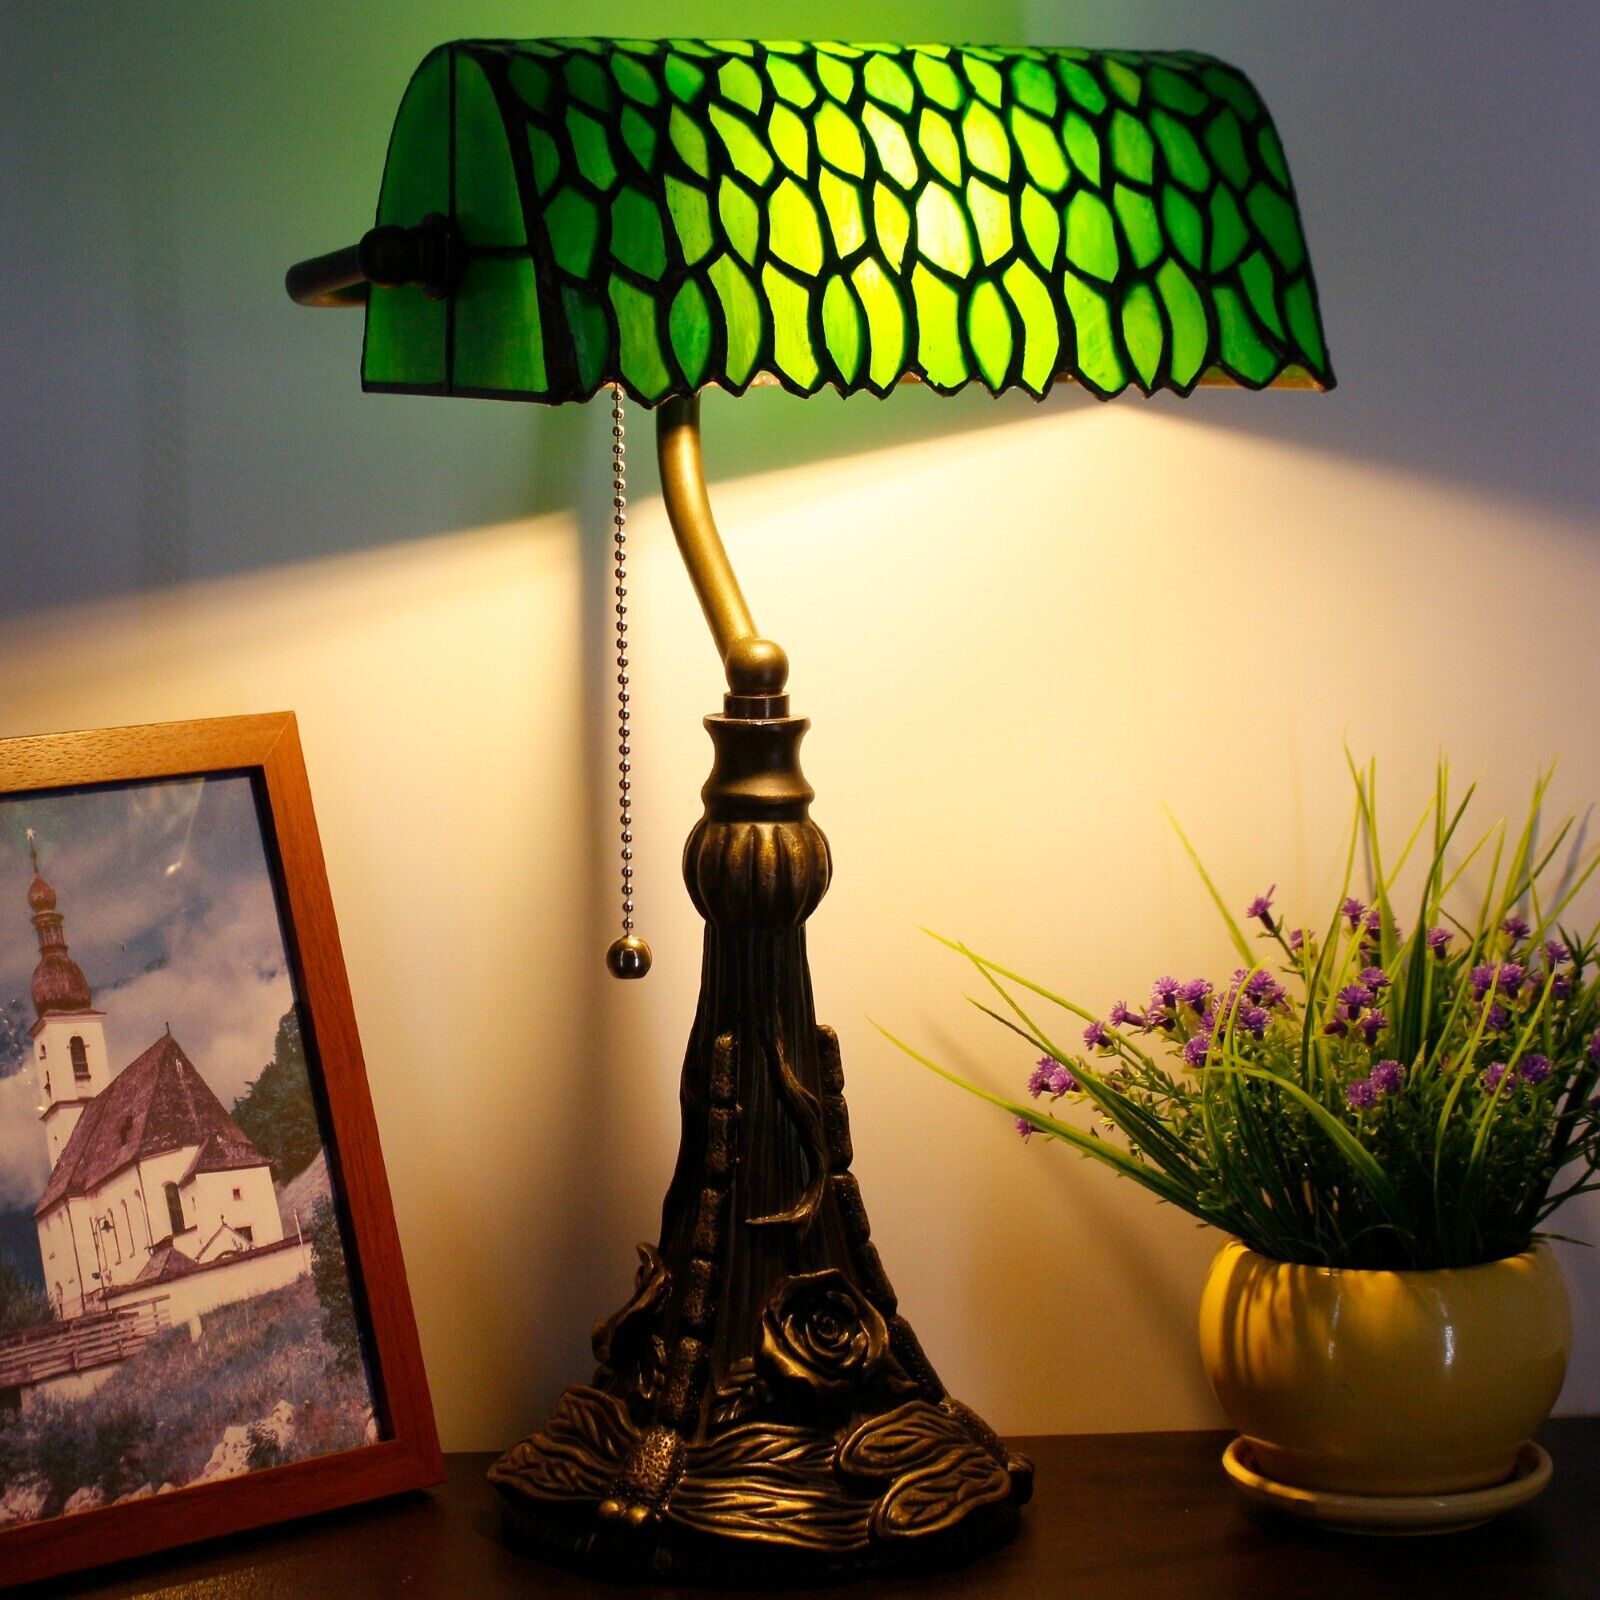 Small Tiffany Table Lamp Green Wisteria Leaves Stained Glass Desk Lamp 11inch